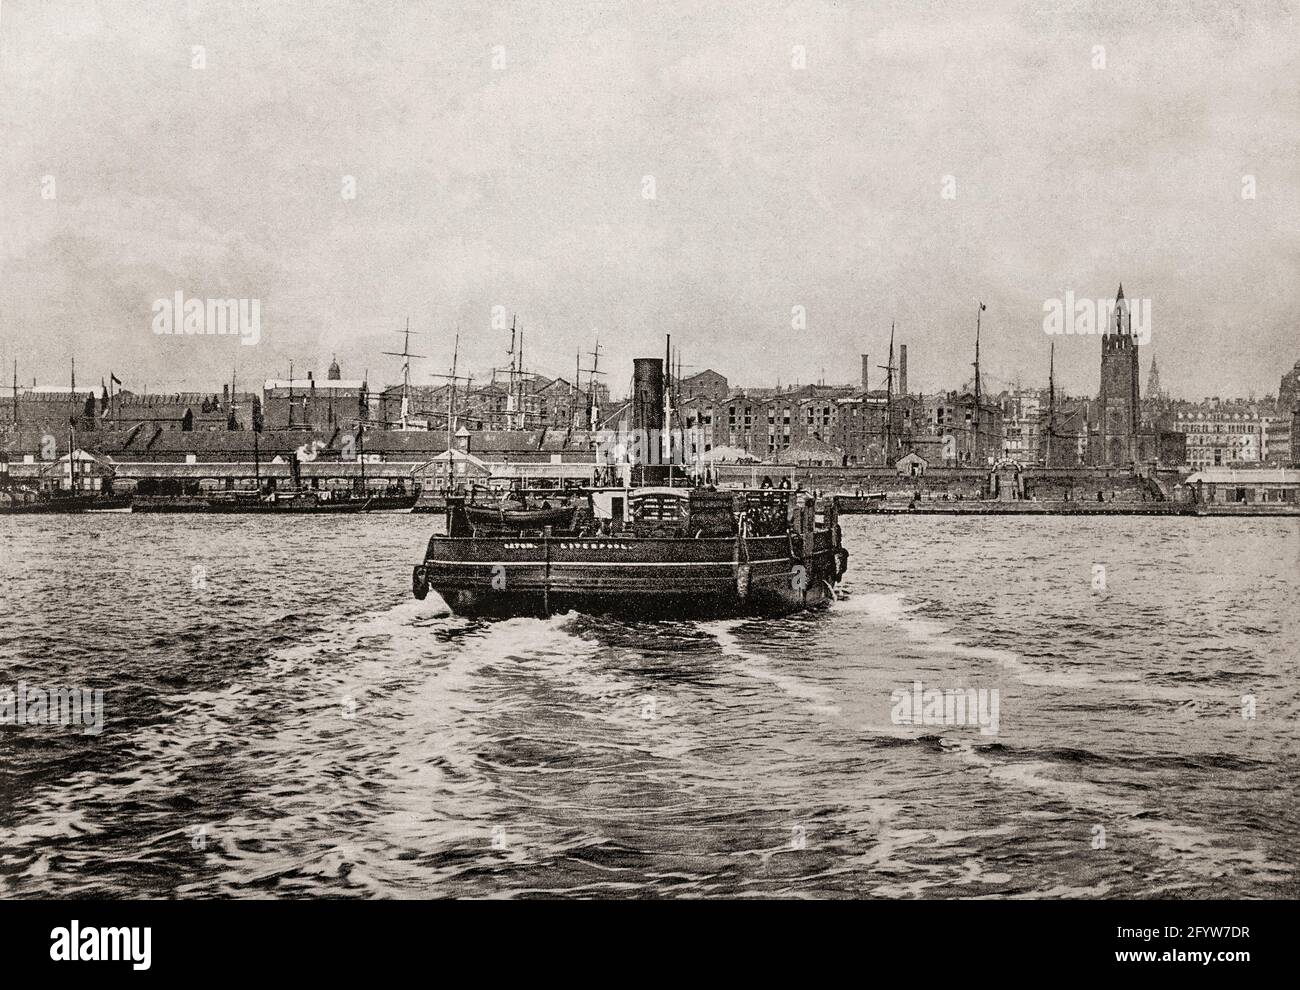 A late 19th century view of a steam ferry crossing the River Mersey from Birkenhead to Liverpool.  Ferries have been used on this route since at least the 12th century, and by the 1840s, Birkenhead was developing into a busy new town. The railway to Chester had opened, the town was growing quickly, and docks were under construction. In 1847, the first floating landing stage, which rose and fell with the tide so that boats could dock at any time, was opened at Liverpool. Stock Photo